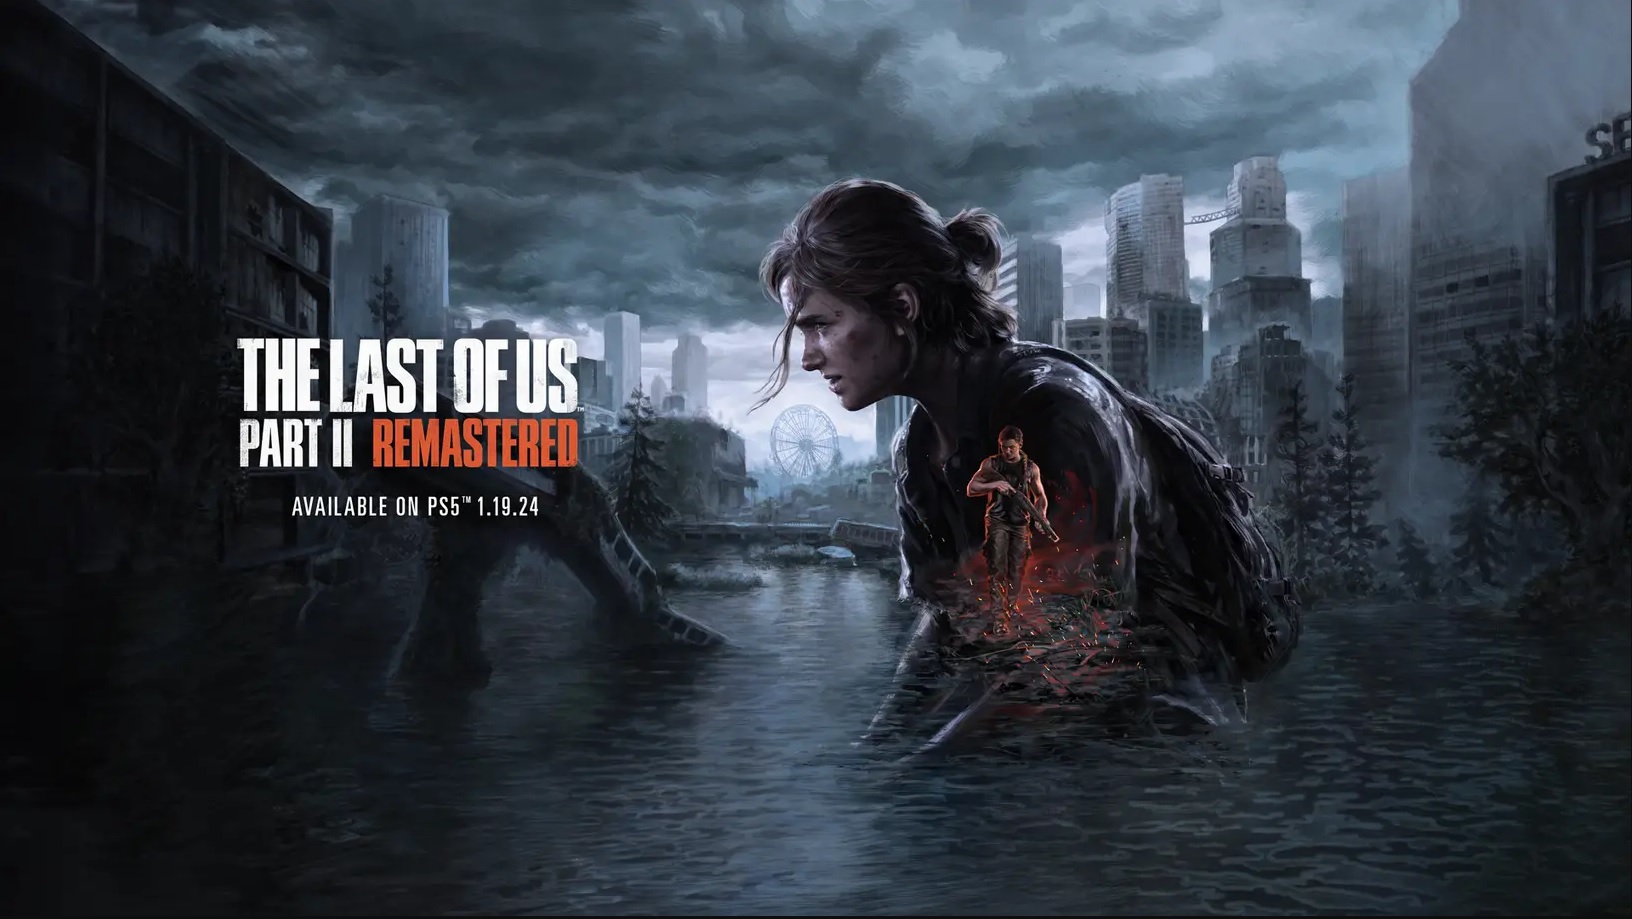 Three years after release, The Last of Us Part 2 is remastered for PS5